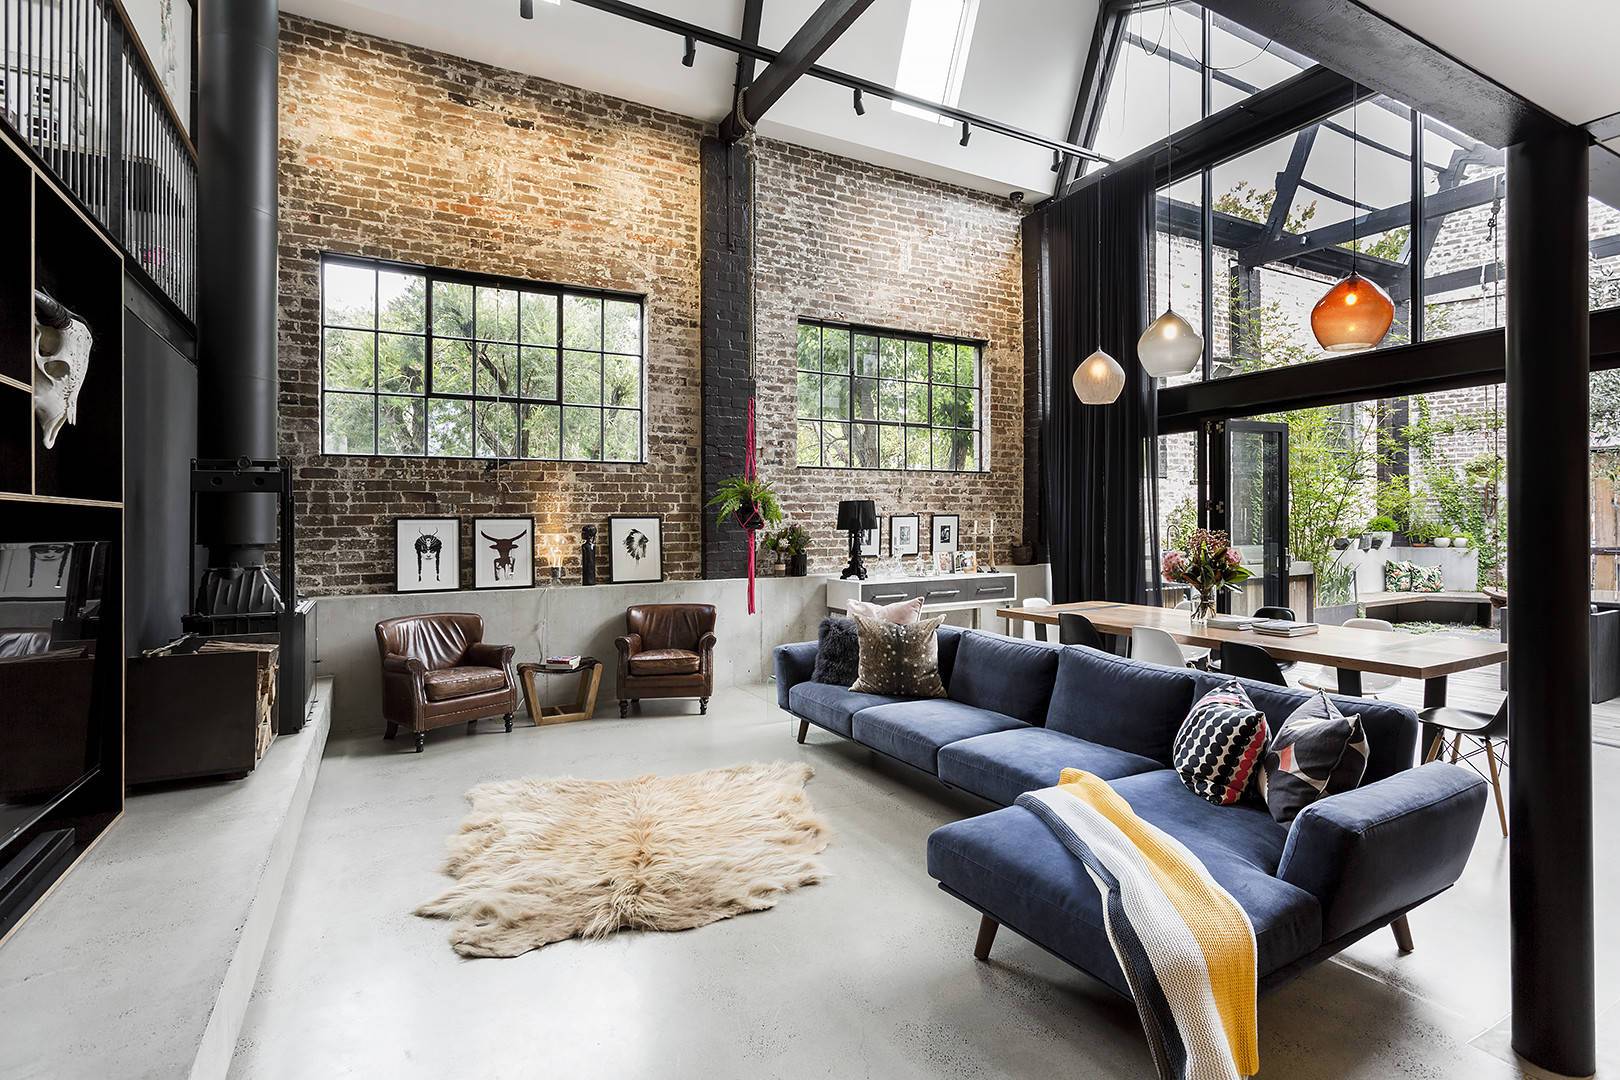 How To Make The Industrial Living Room Style Work For You